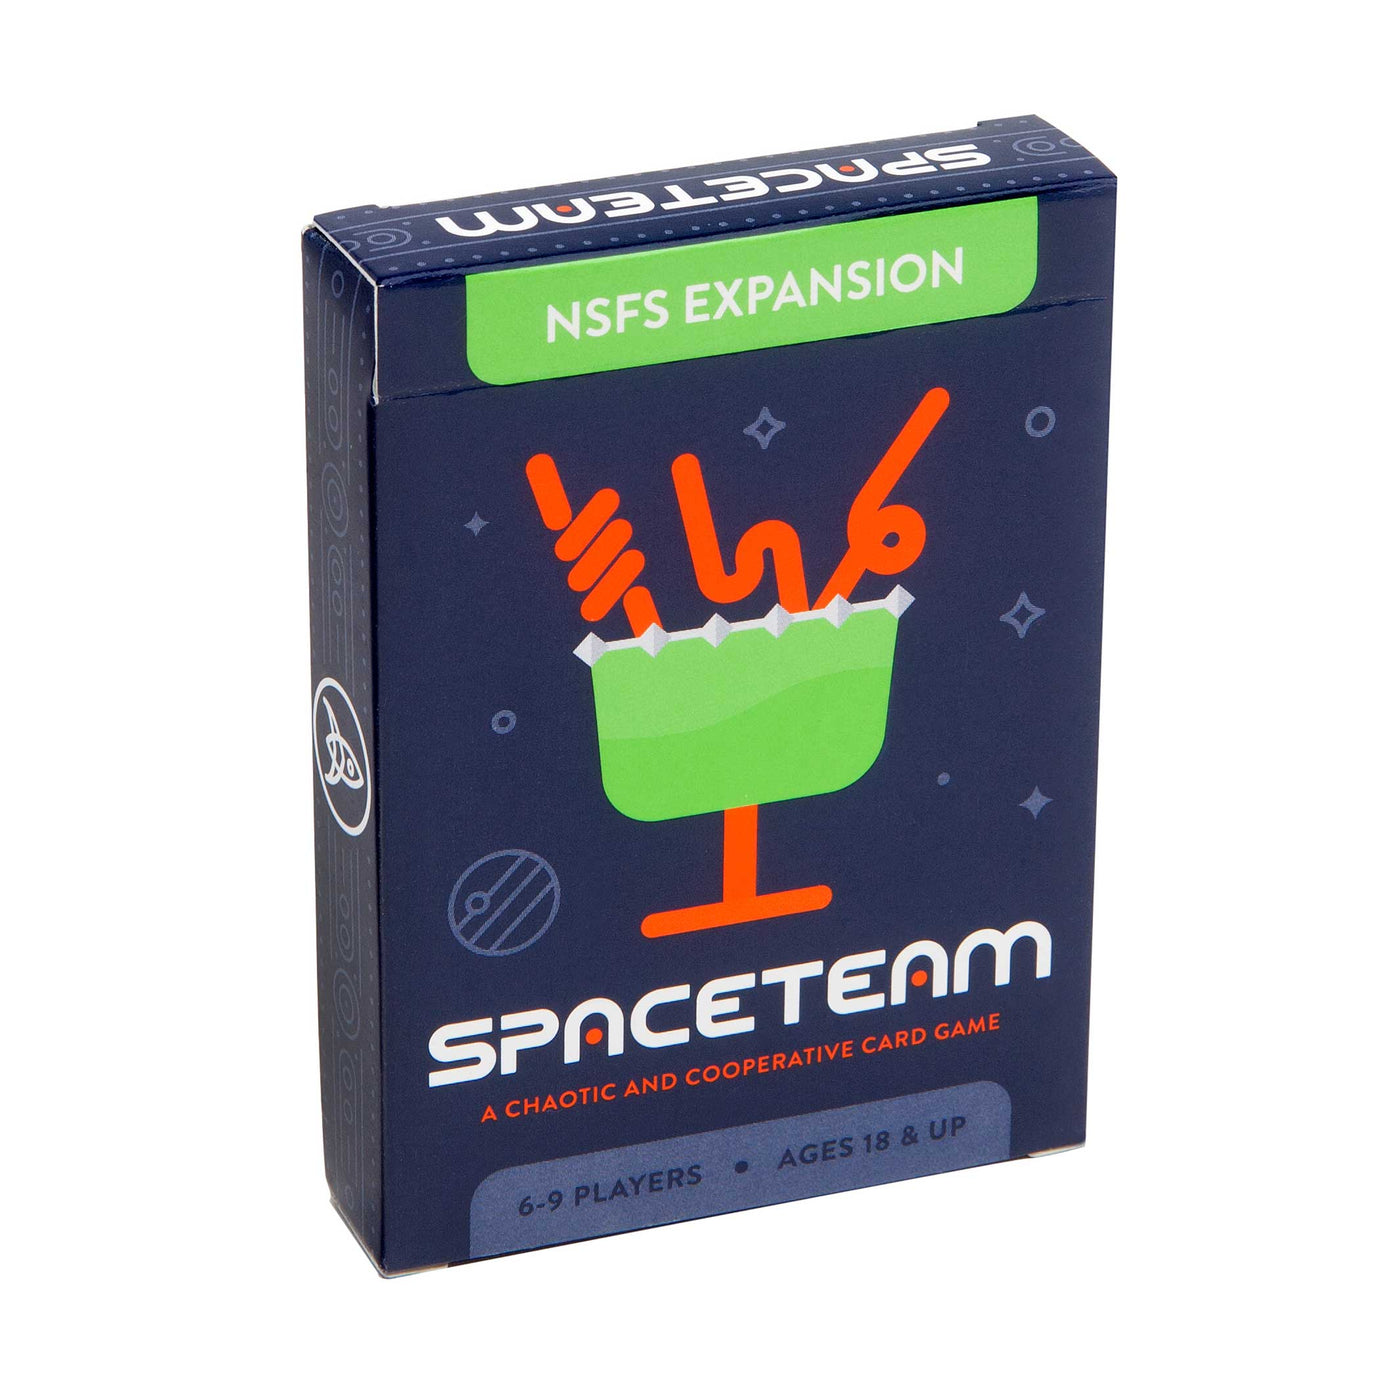 Front of Packaging for Spaceteam game's expansion: NSFS